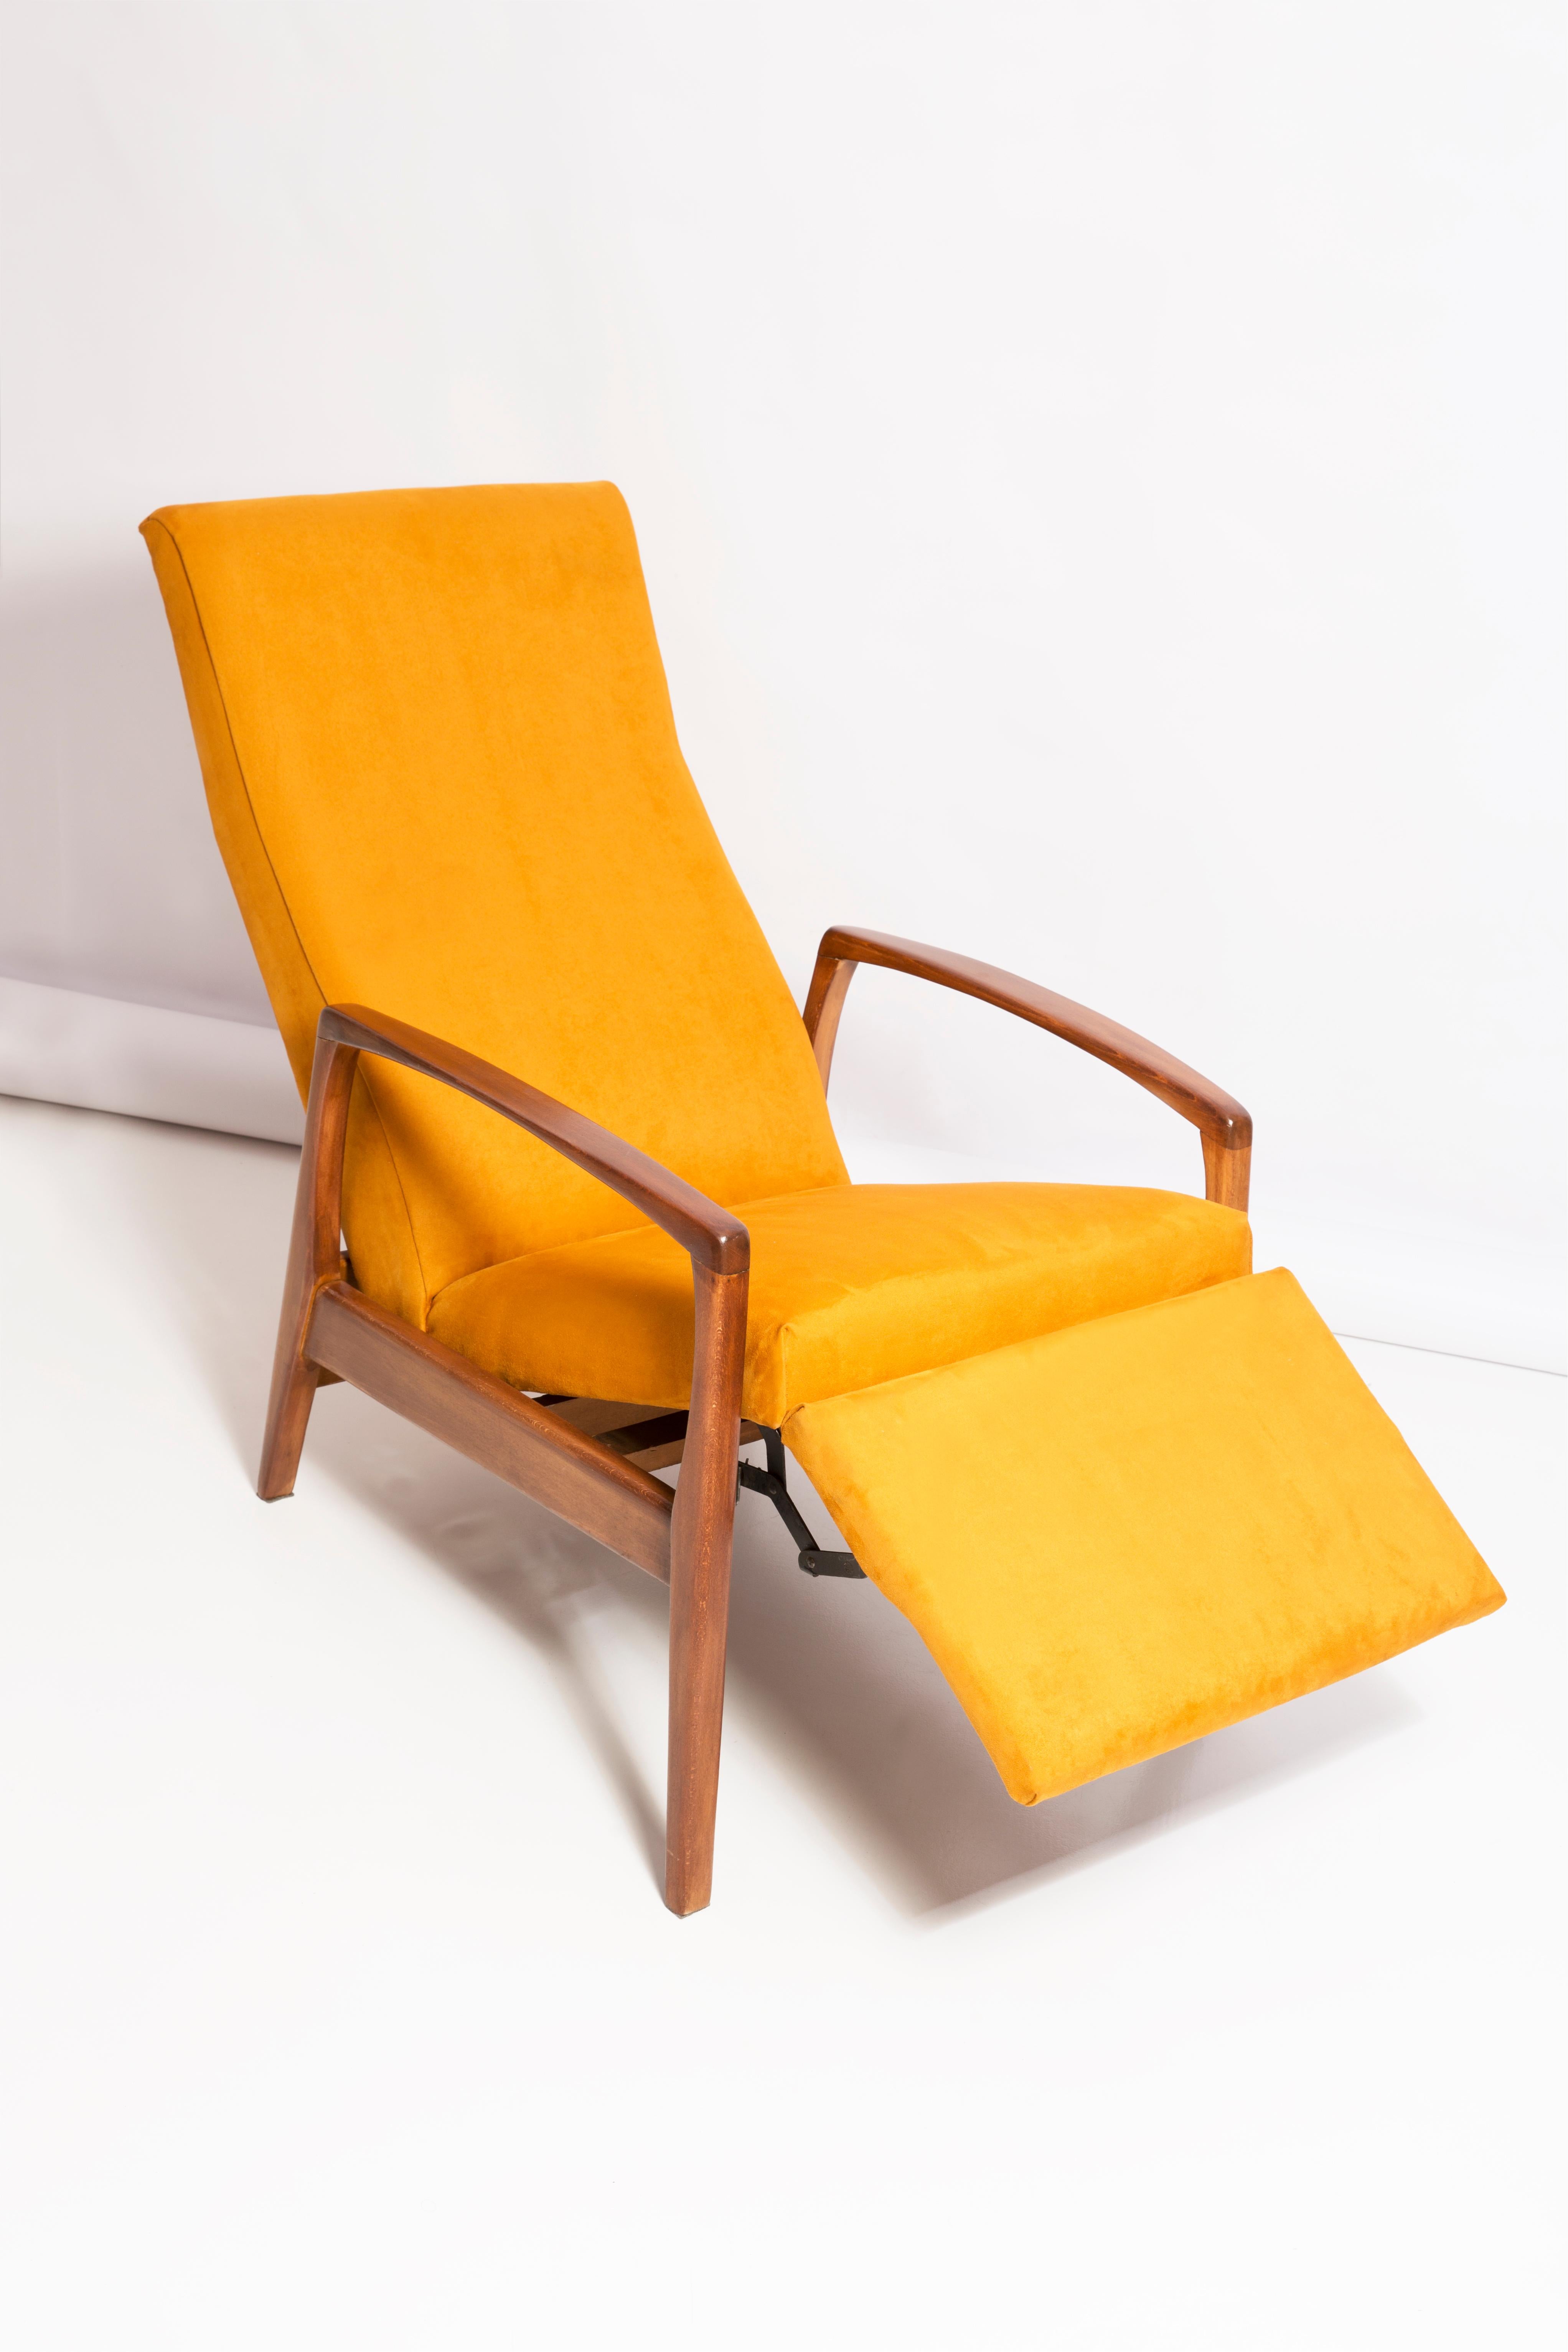 20th Century Yellow Fold-Out Armchair, Europe, 1960s For Sale 5